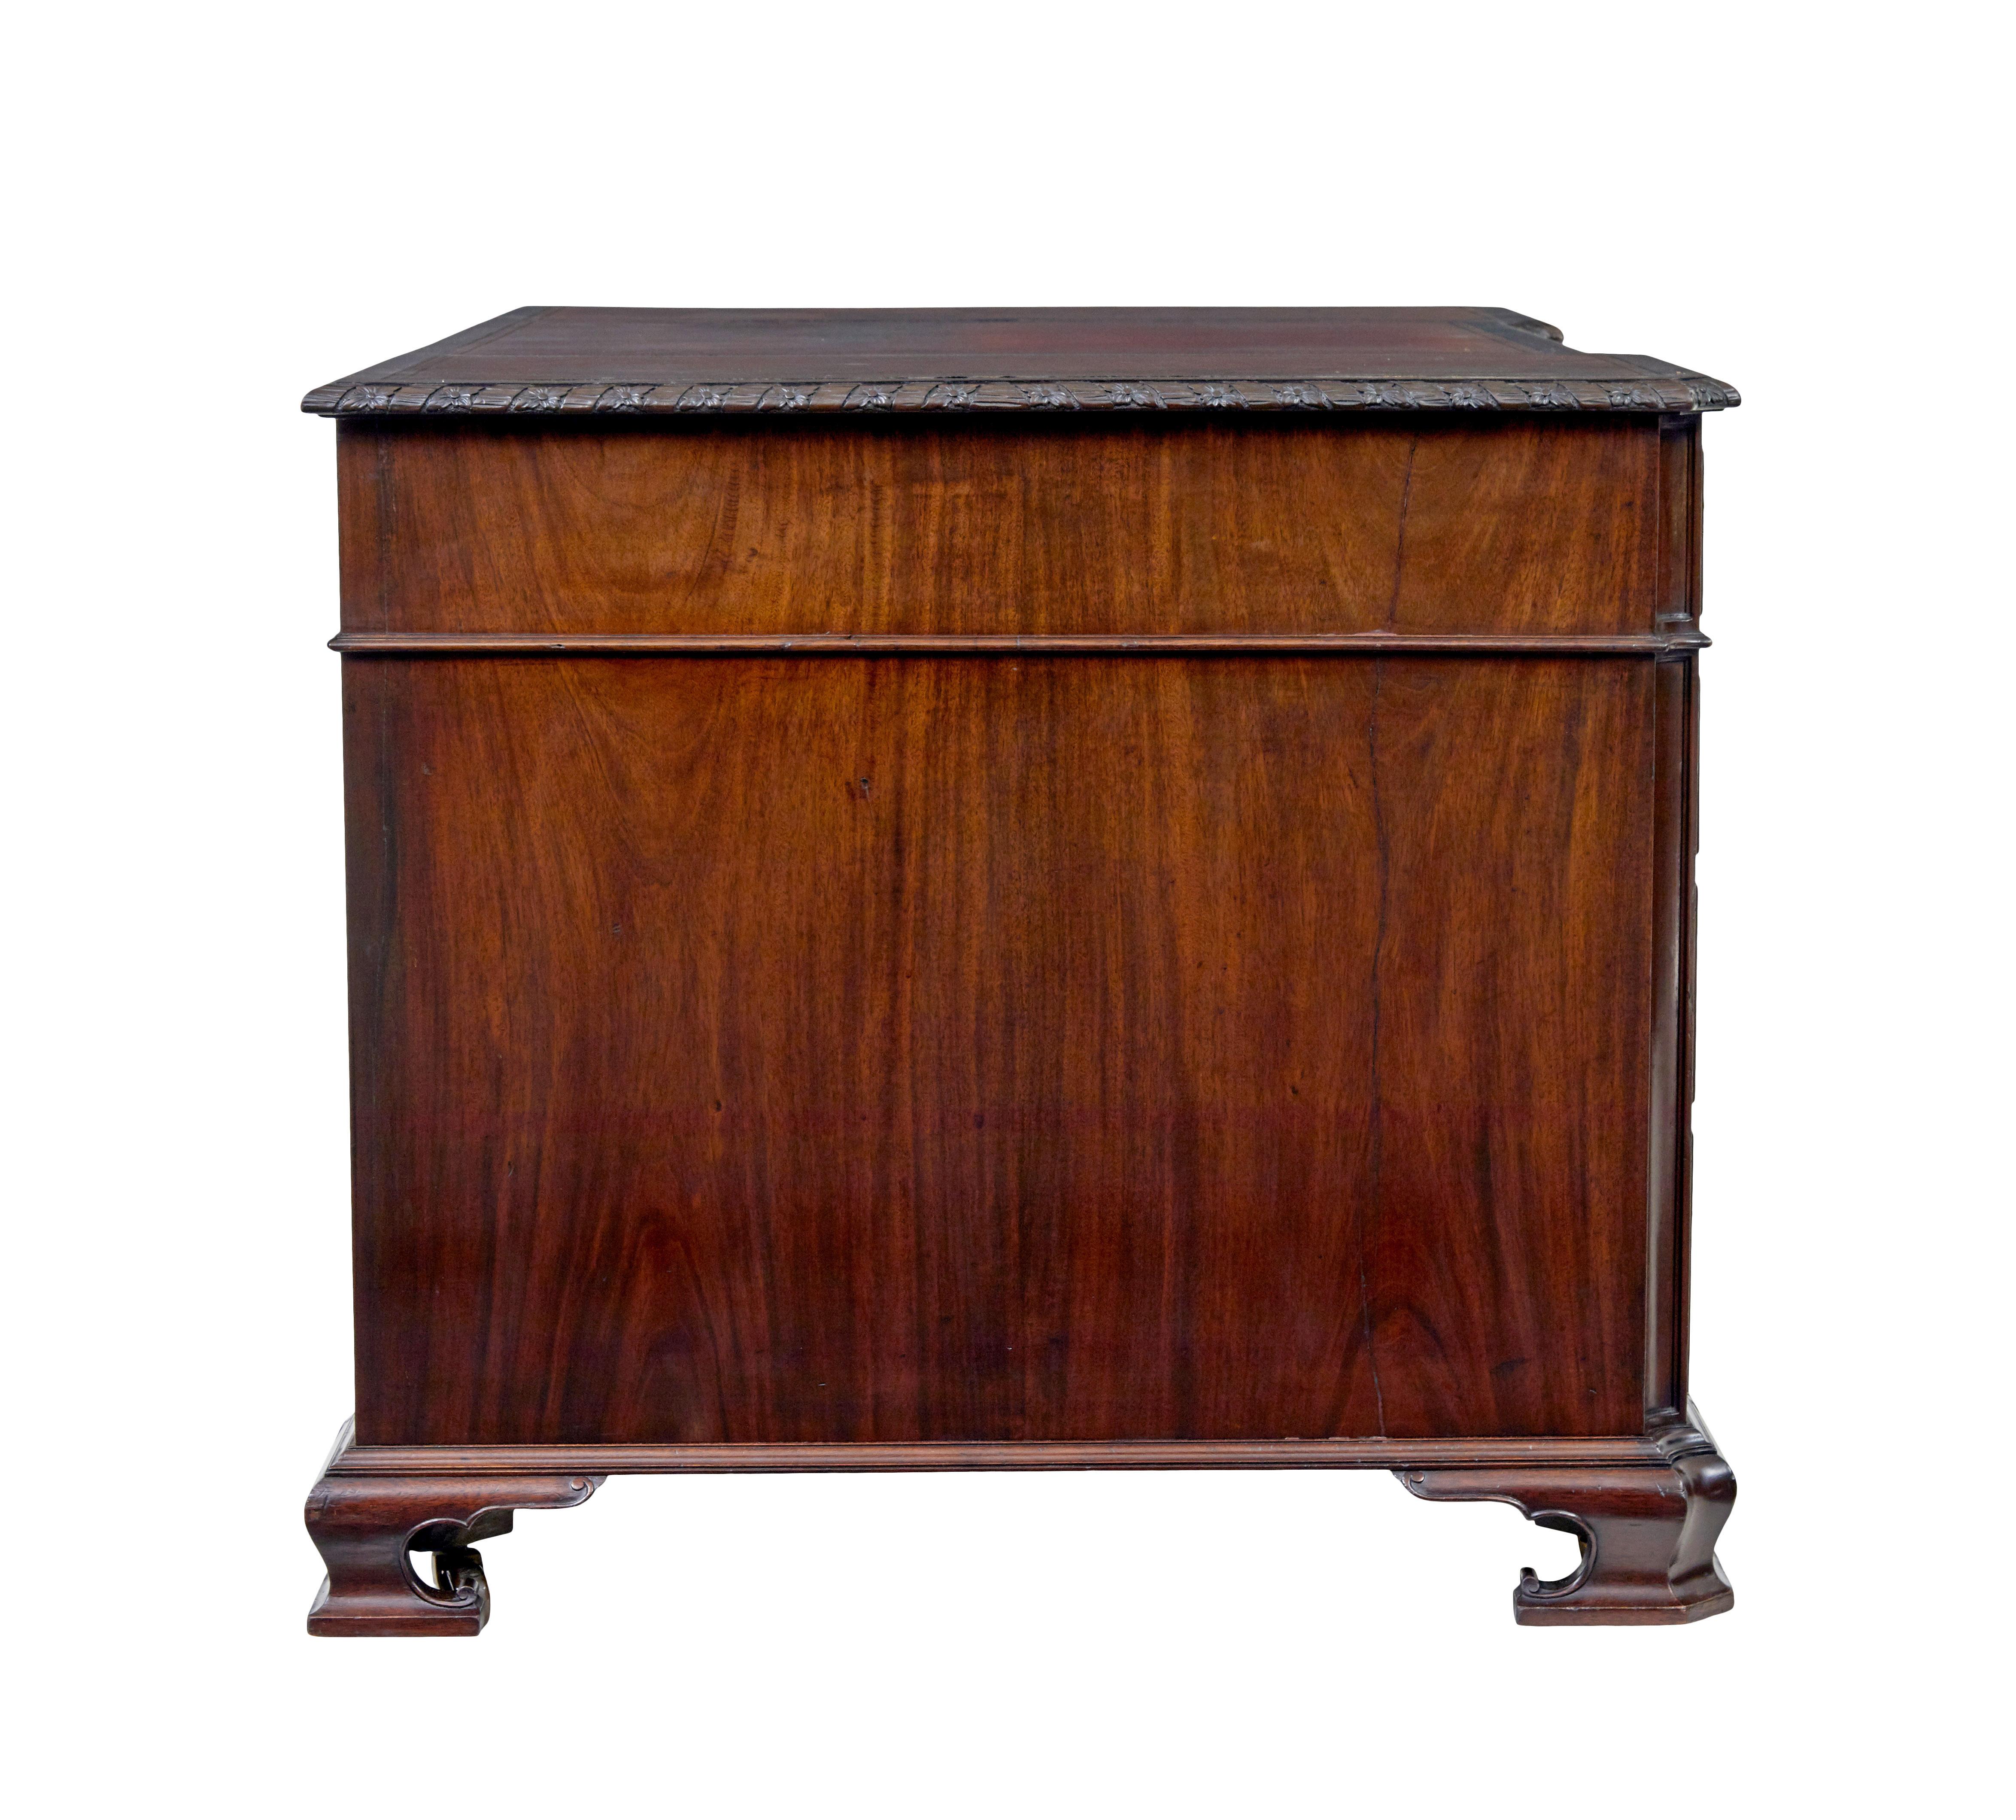 Early 20th century mahogany pedestal desk by Hobbs & Co In Good Condition For Sale In Debenham, Suffolk